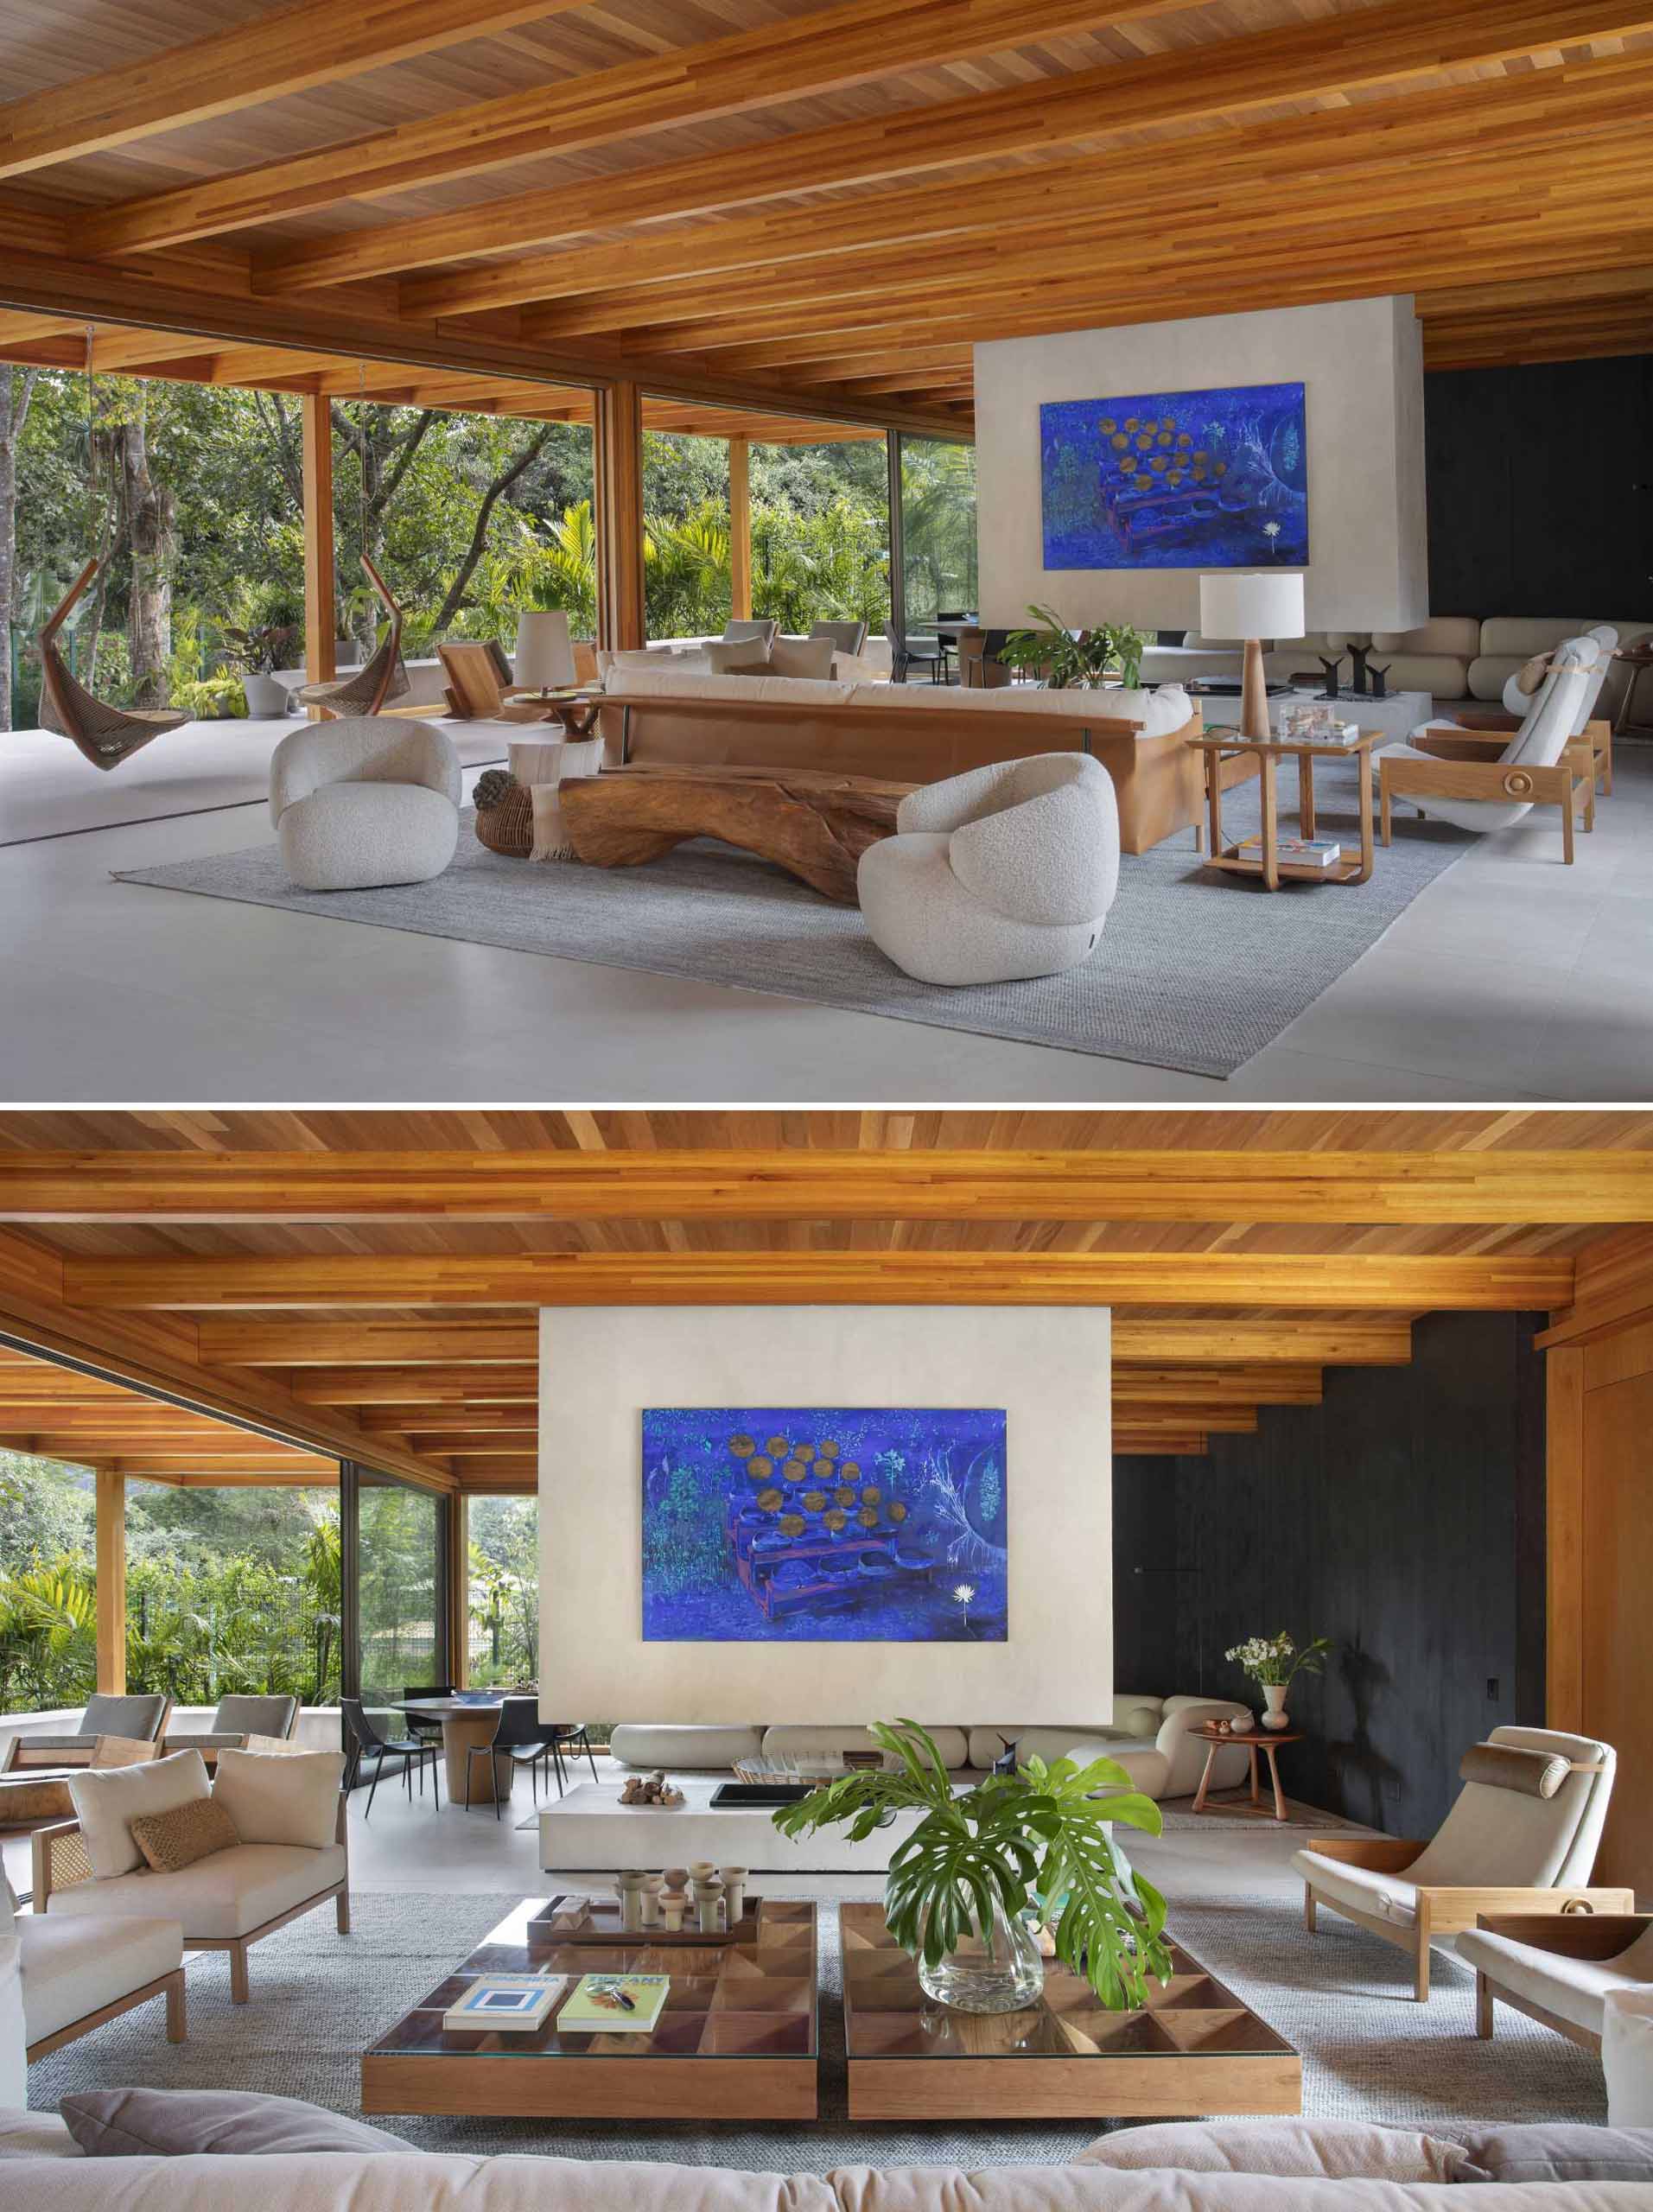 Stepping inside this modern home, there's a large living room with the post and beam structure on display. A double-sided, suspended fireplace can be enjoyed from the sitting area. 